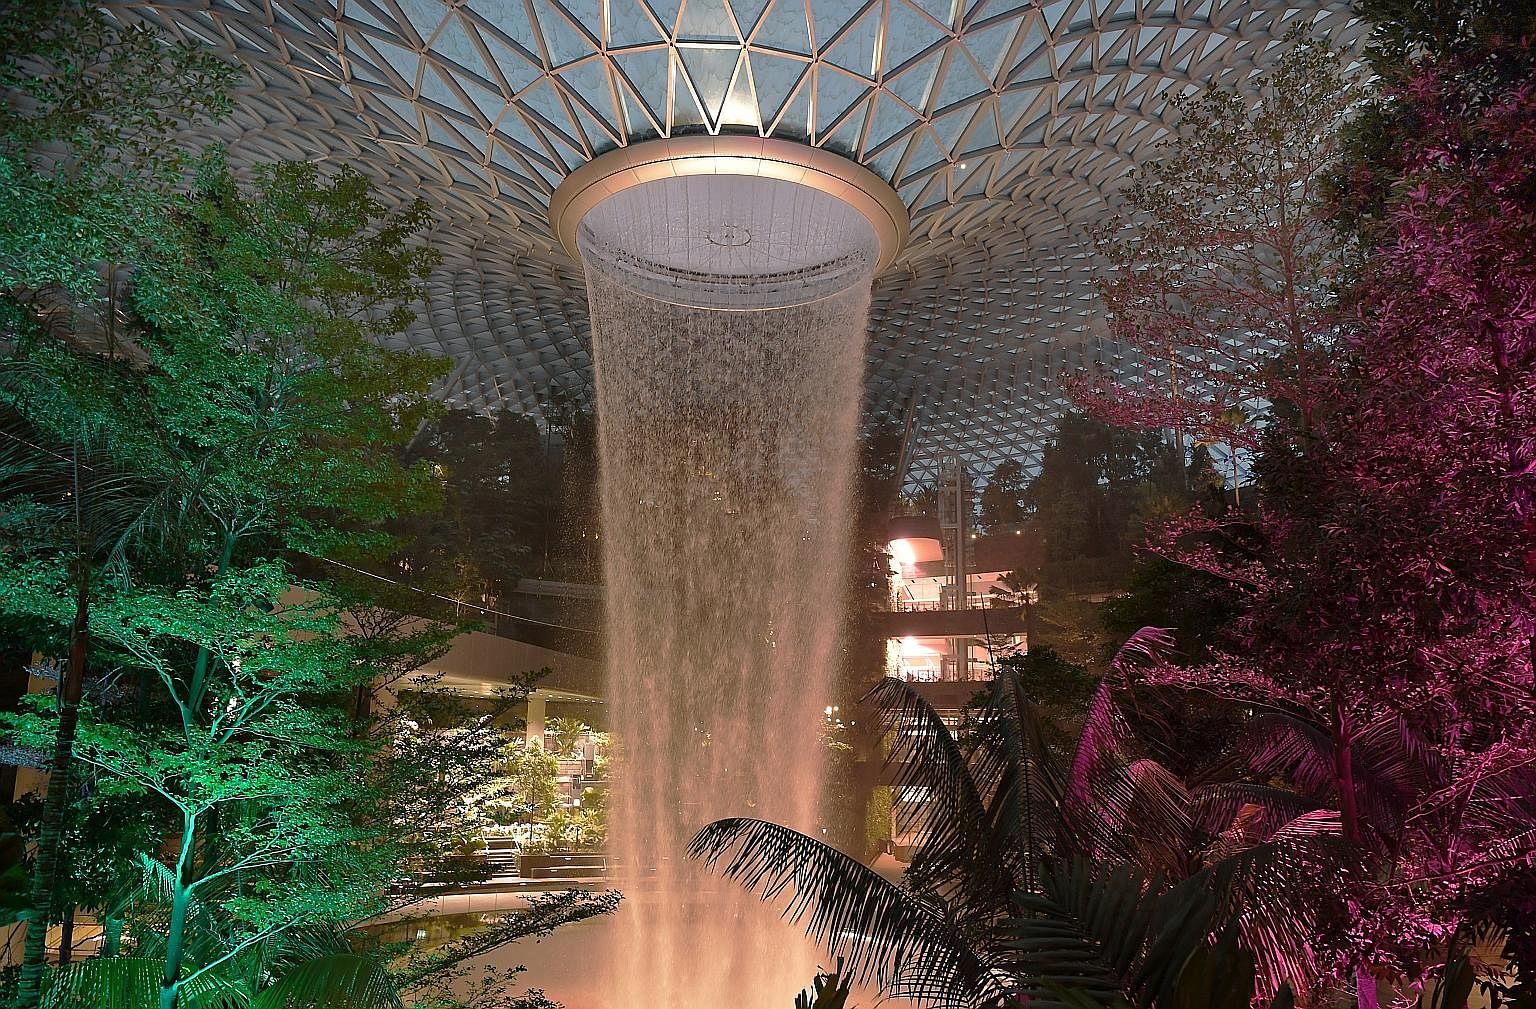 April 17 has been marked for the opening of Changi Airport's Jewel, the $1.7 billion mega-retail and aviation development which boasts the world's tallest indoor waterfall (above). But 500,000 Singapore residents can get a sneak peek of the 10-storey